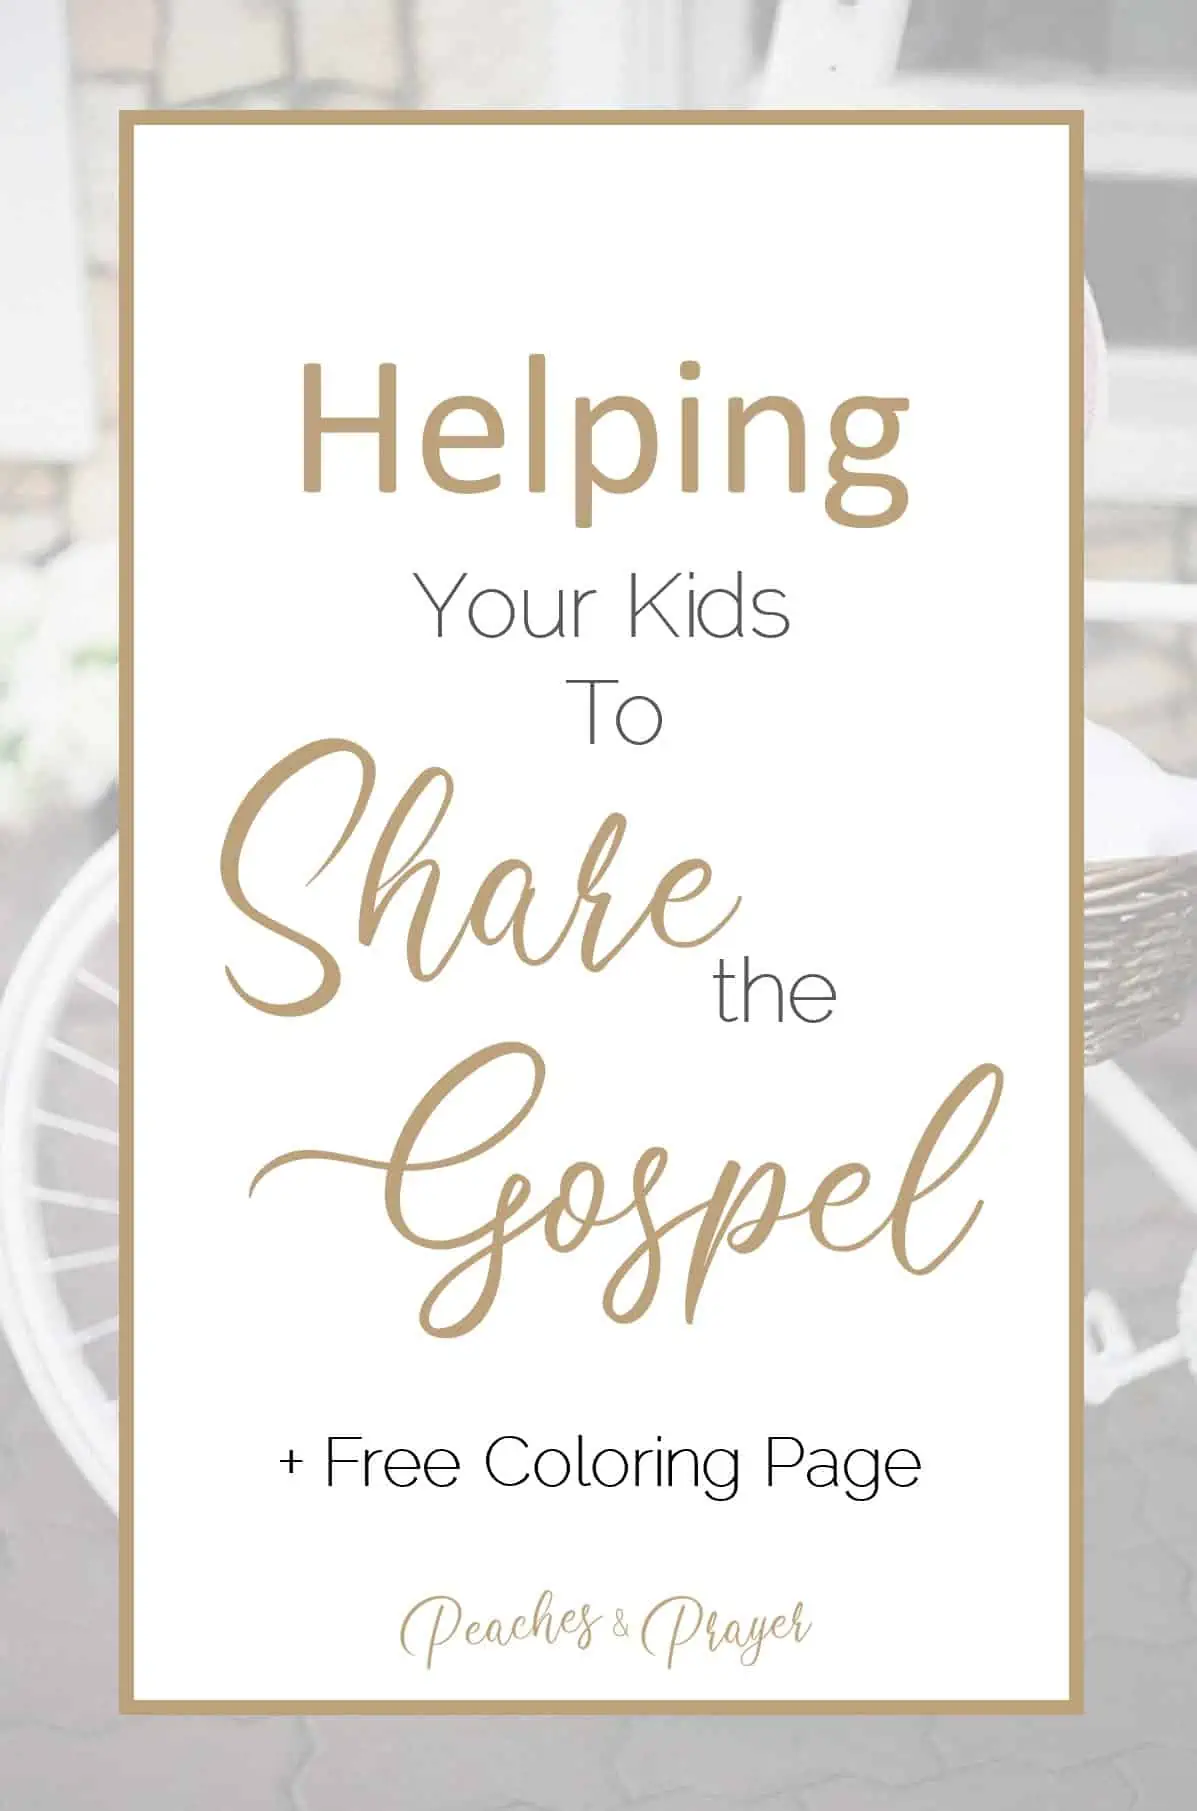 A Simple Tool for Teaching Your Kids to Share the Gospel